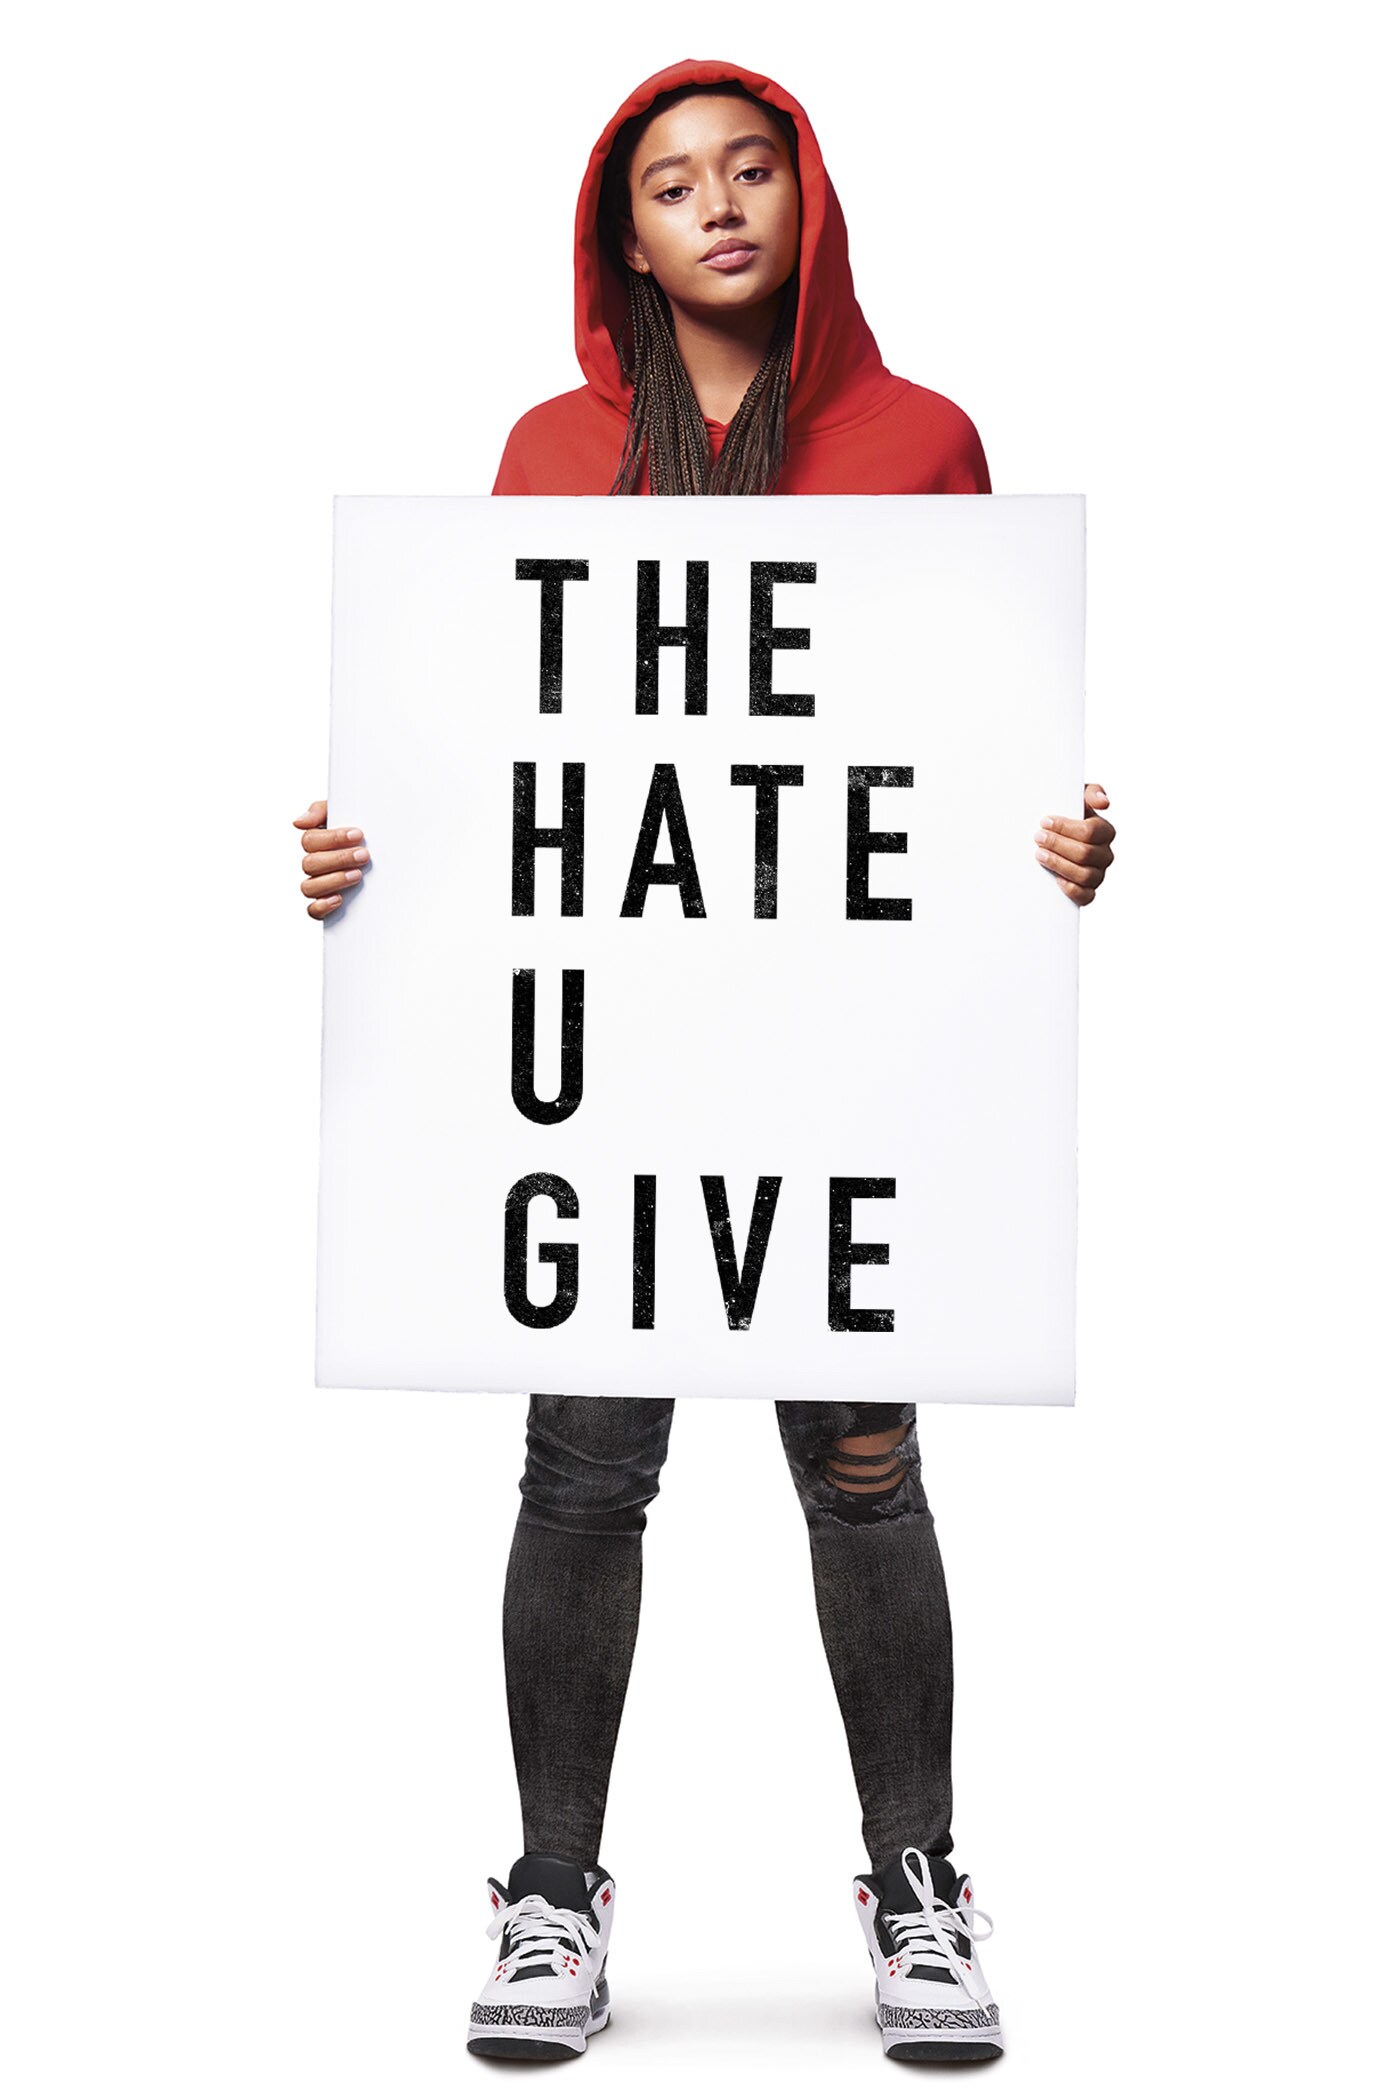 The Hate U Give movie poster